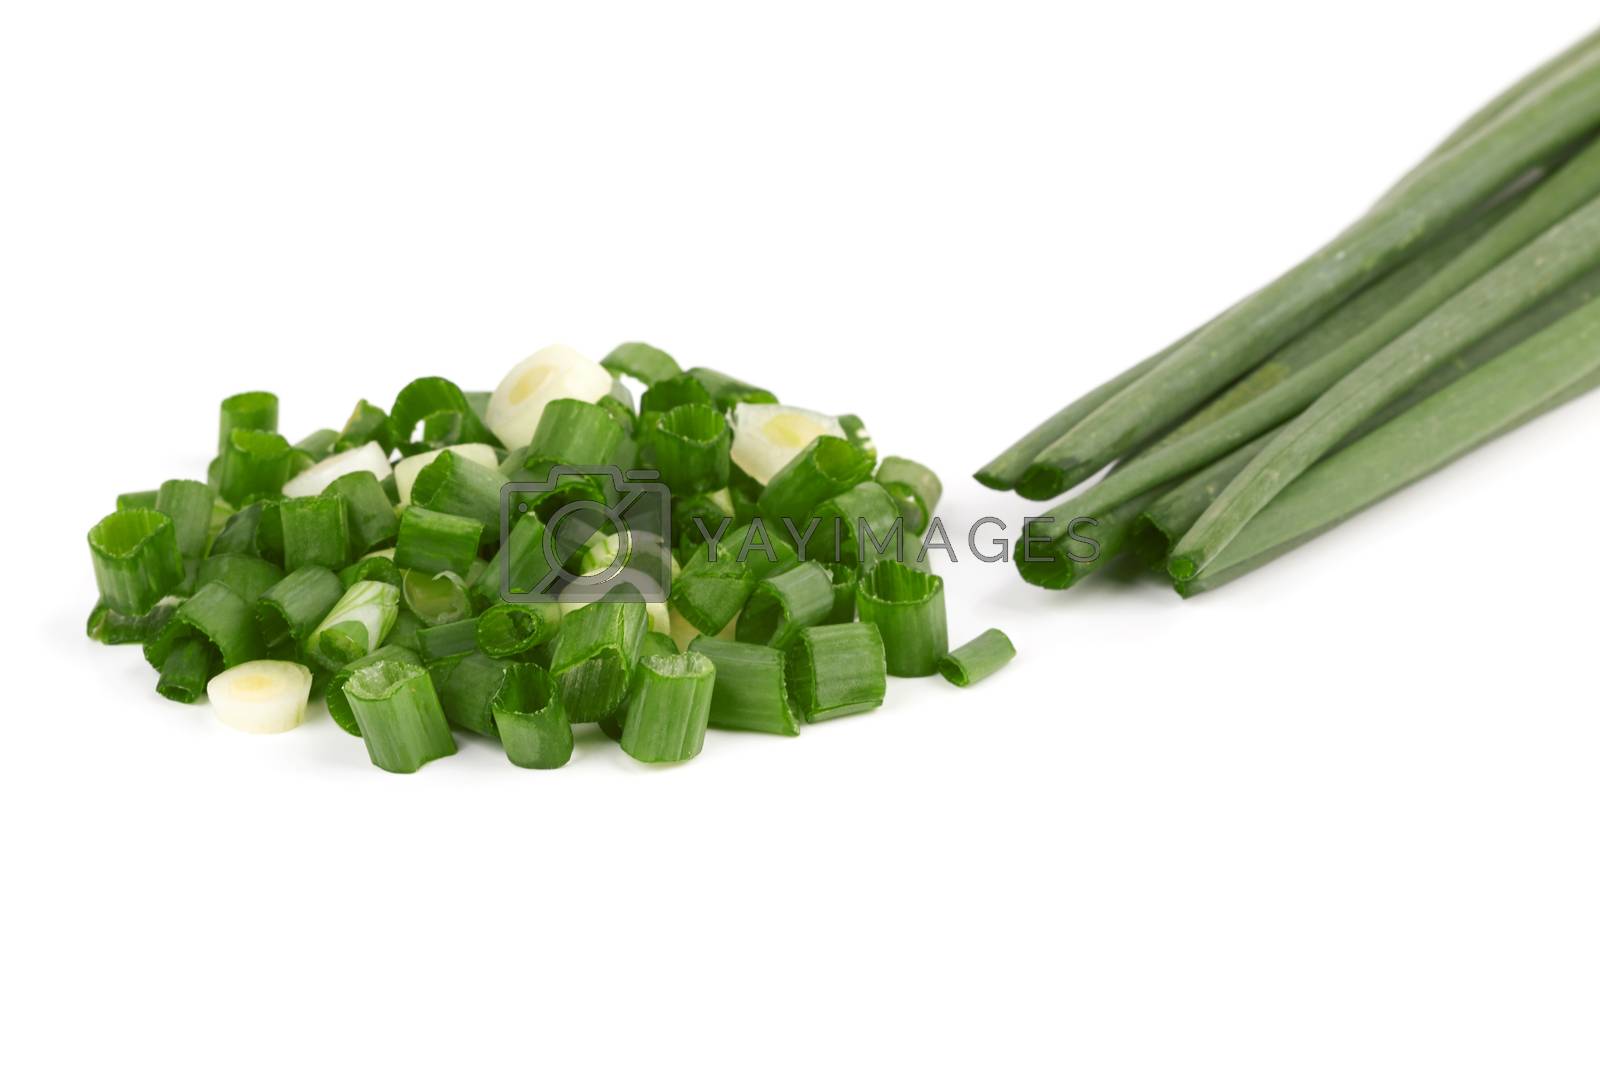 Royalty free image of Green onions by pioneer111